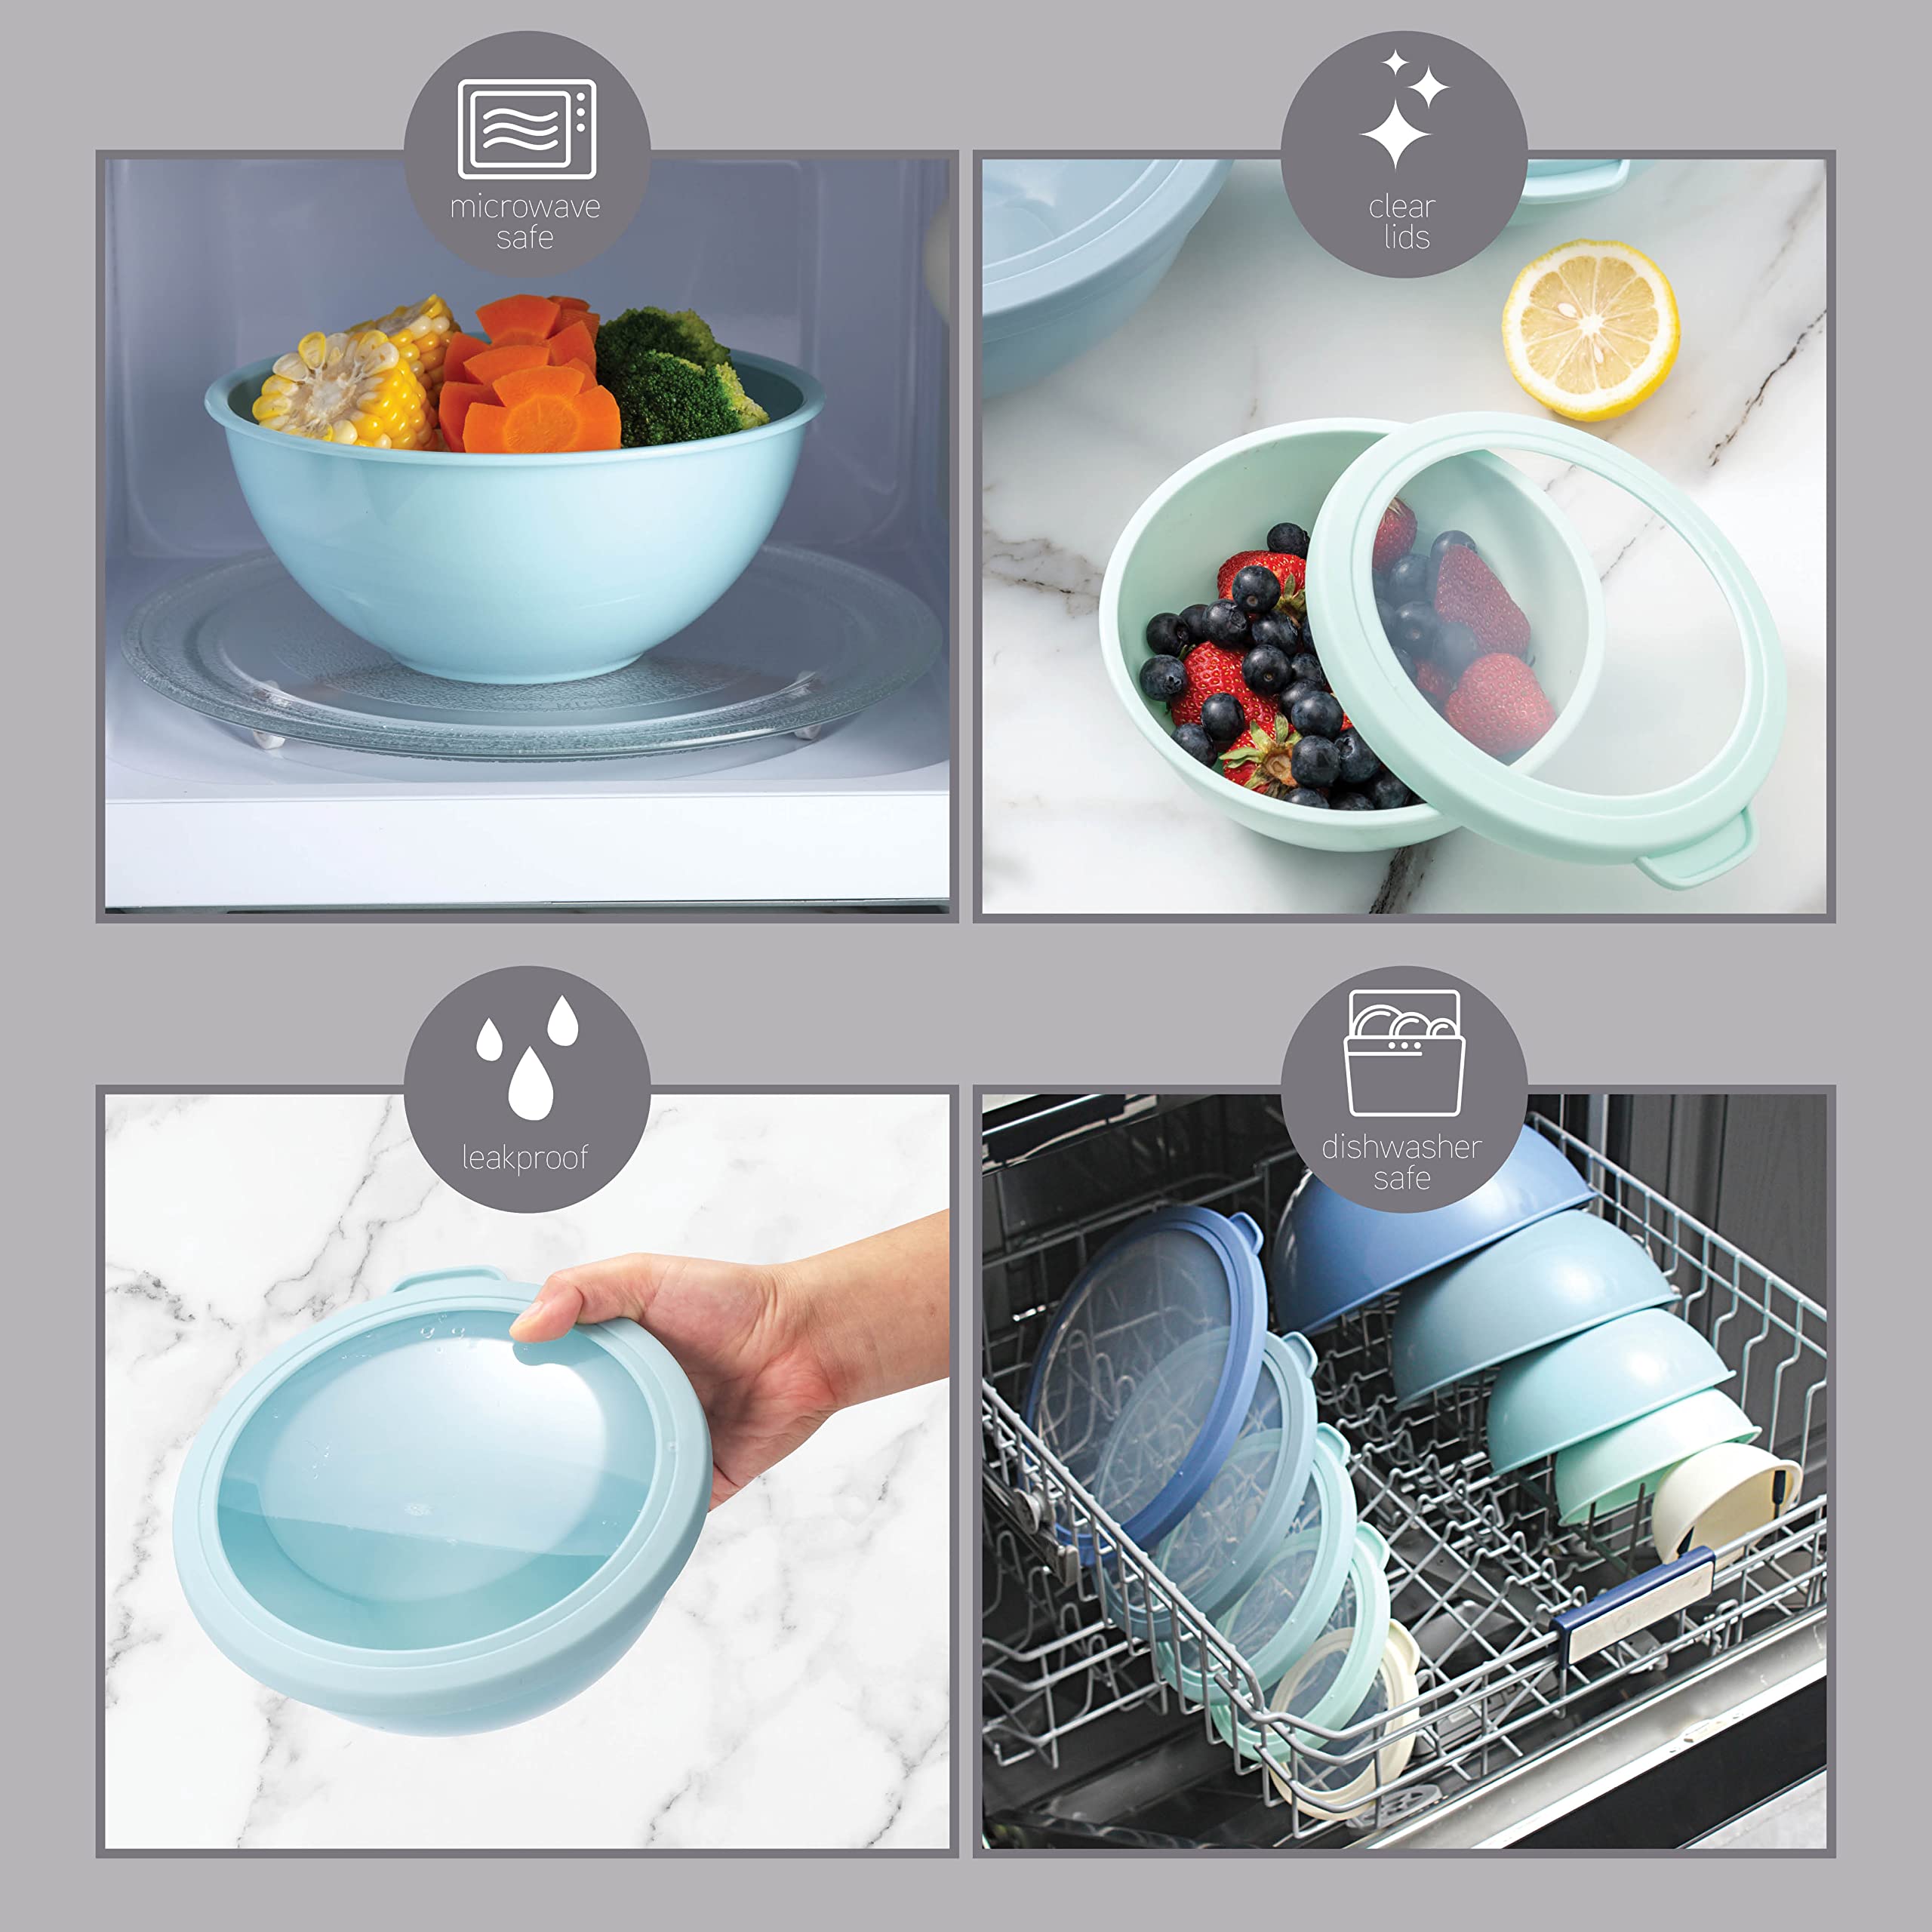 COOK WITH COLOR Mixing Bowls with TPR Lids - 12 Piece Plastic Nesting Bowls Set includes 6 Prep Bowls and 6 Lids, Microwave Safe (Blue)